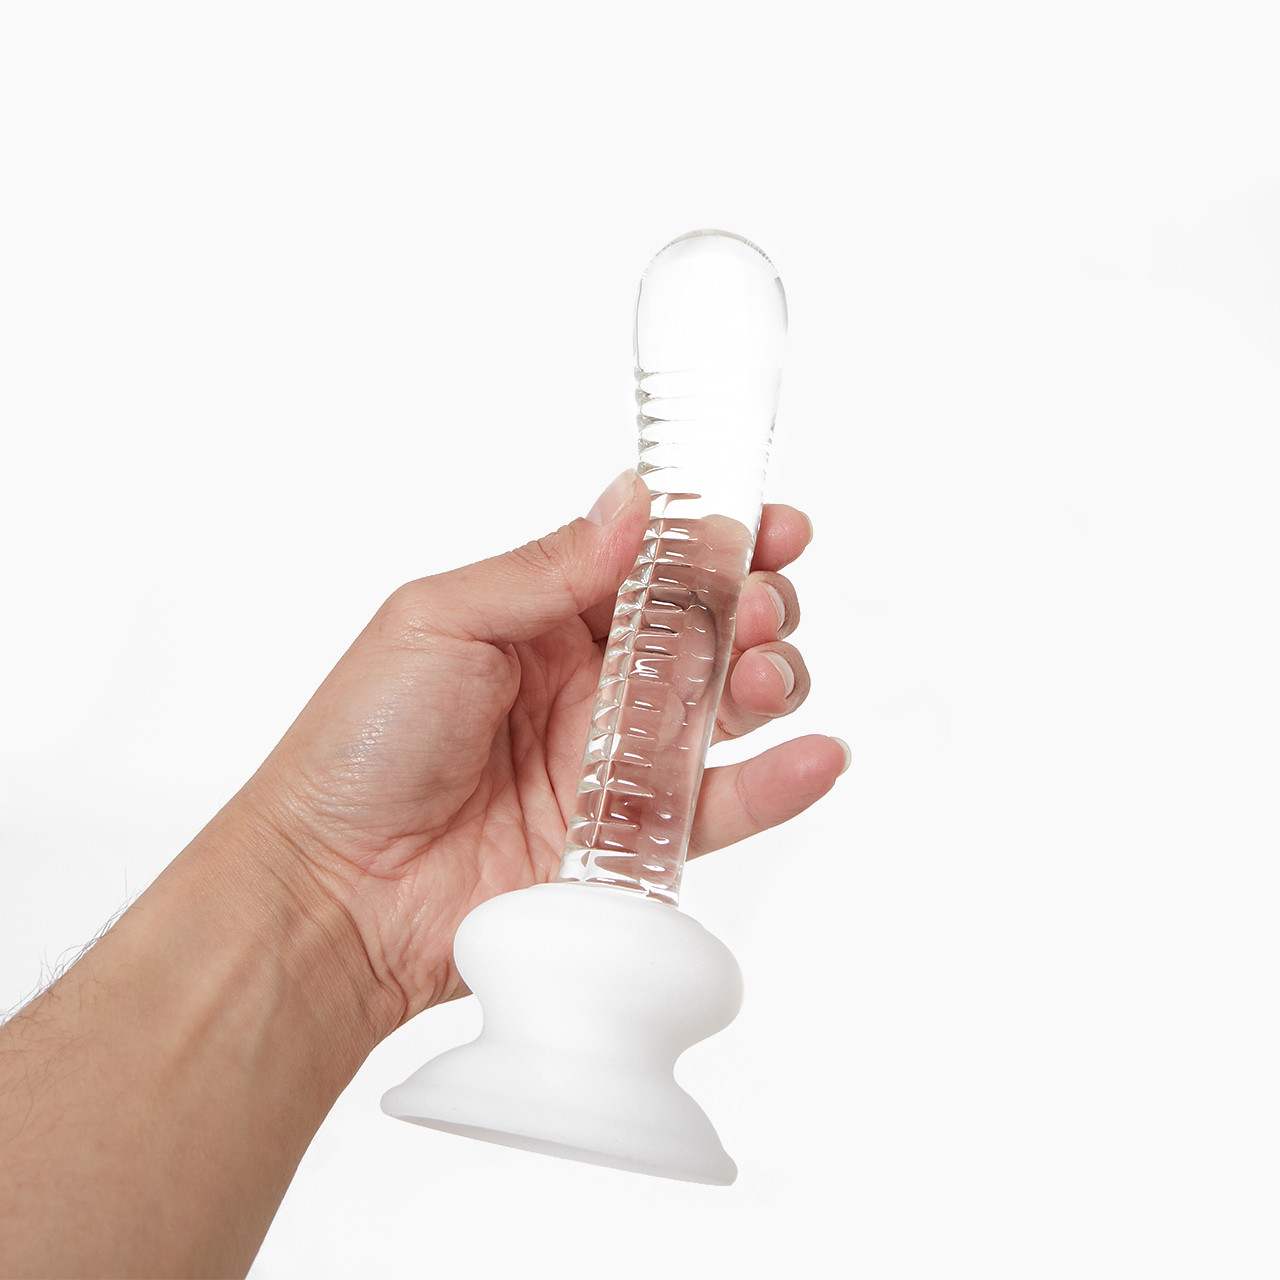 Icicles No. 88 G-Spot Ridged Glass Dildo' with a clear ribbed texture and a white base held in a hand